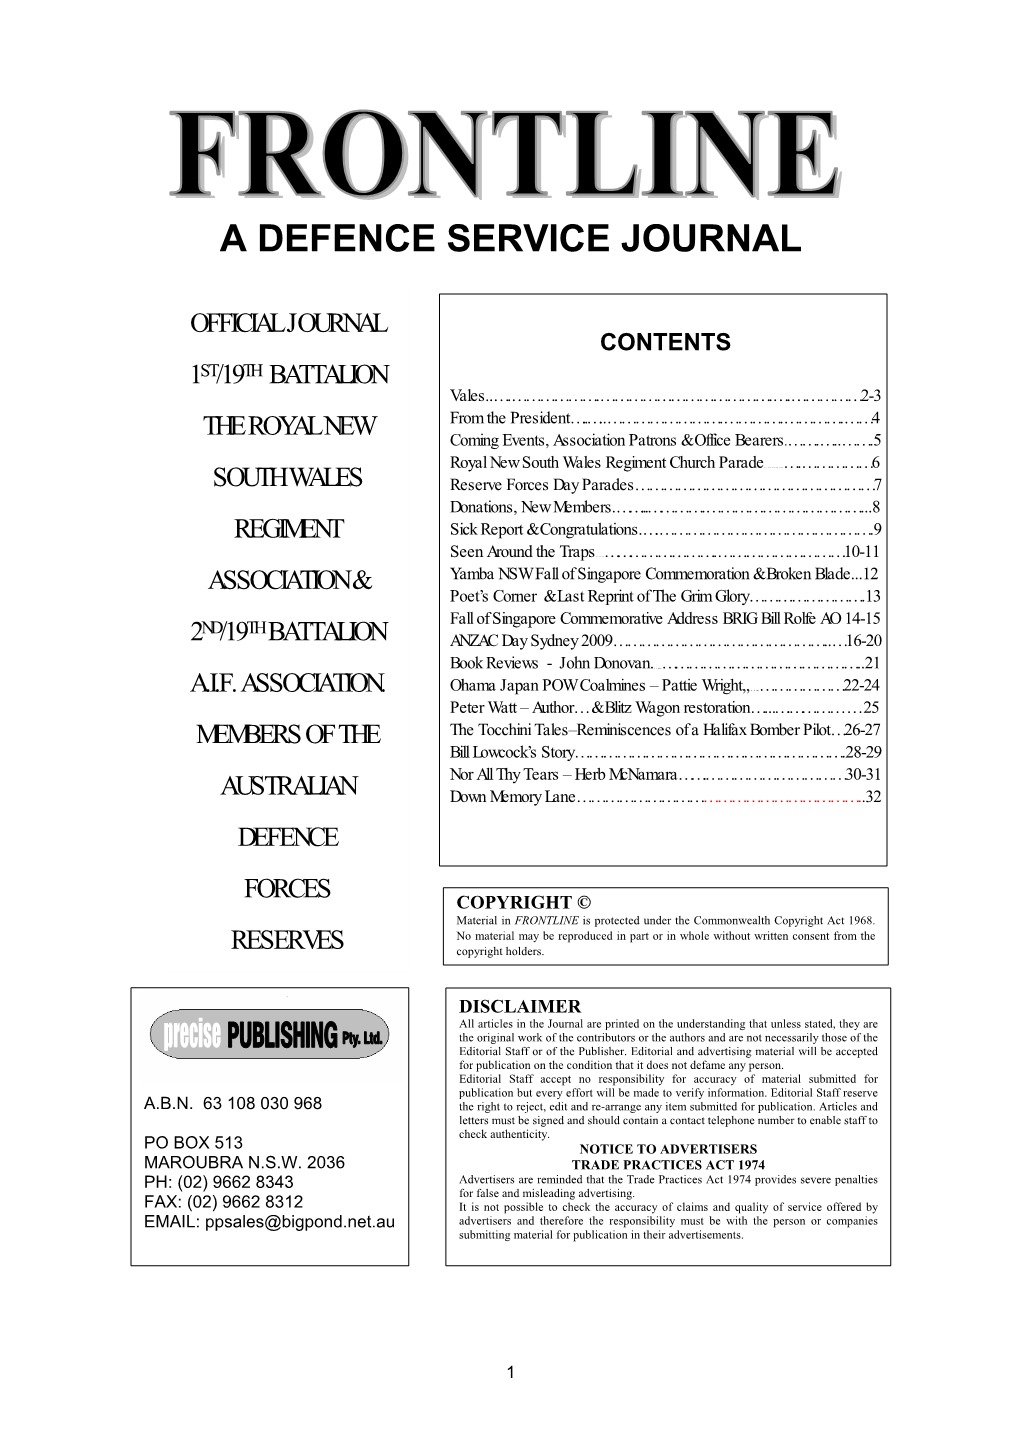 A Defence Service Journal